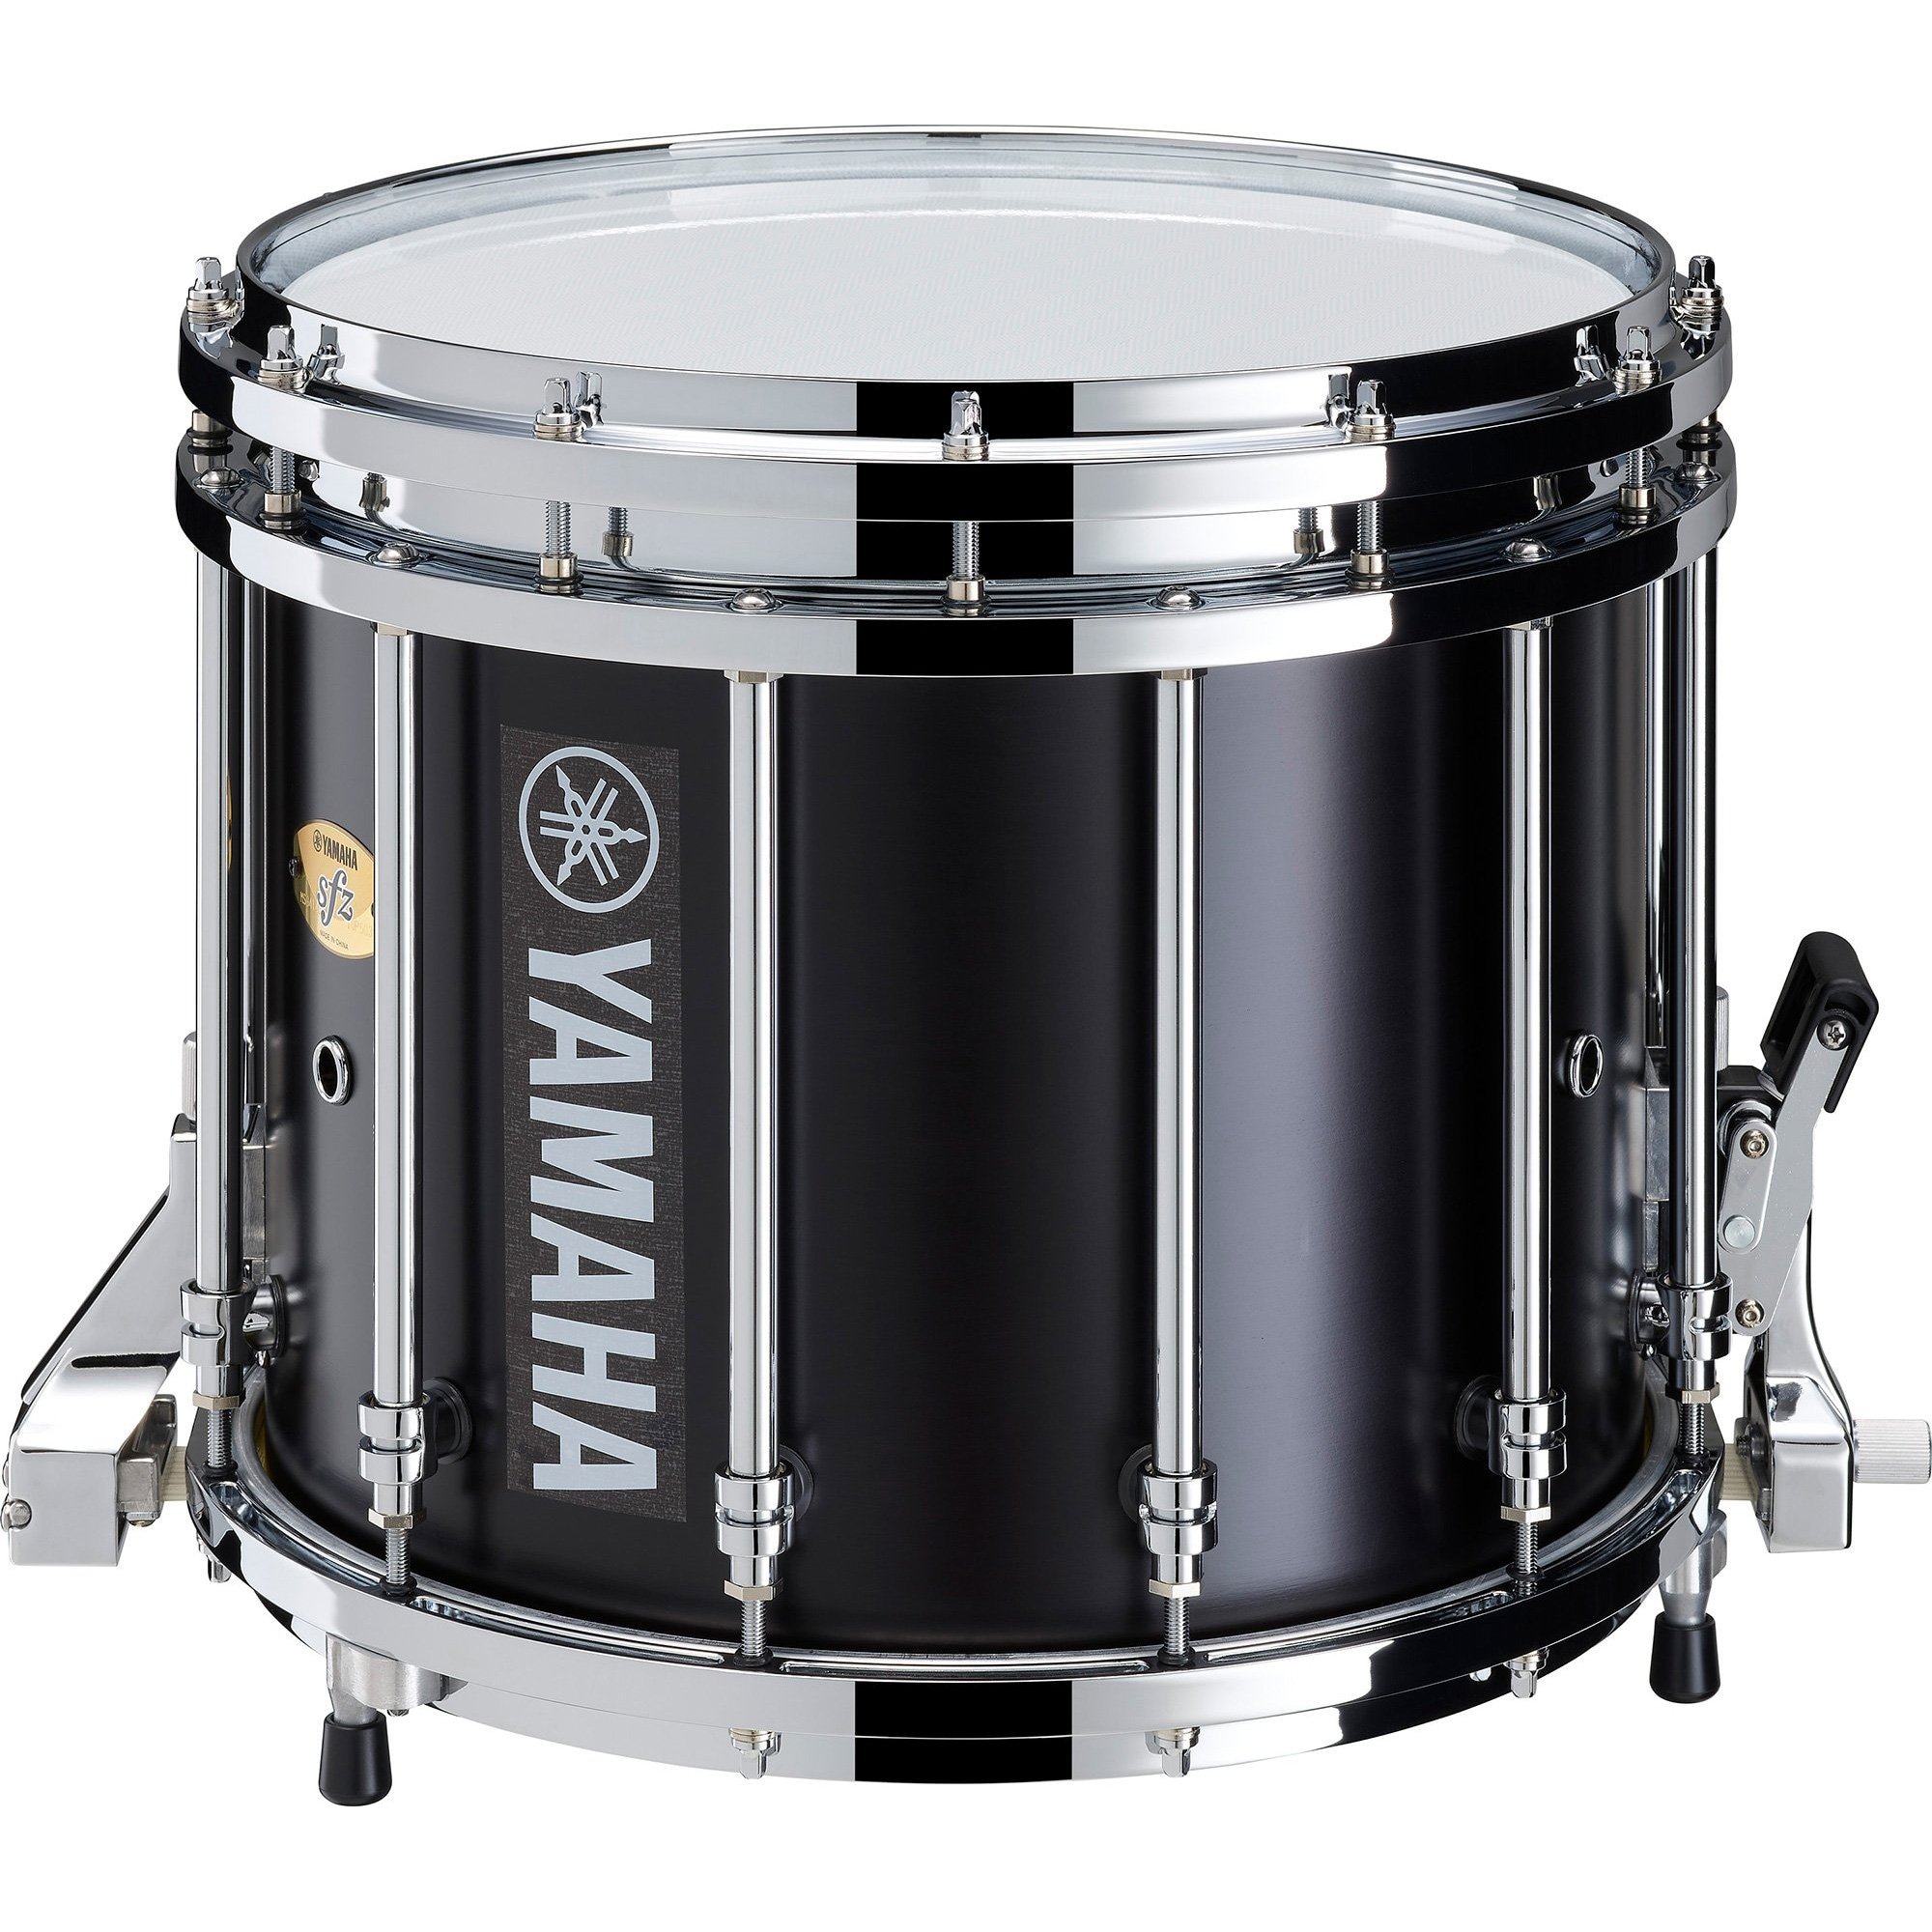 MS-9414 Series - Overview - Marching Drums - Marching Instruments 